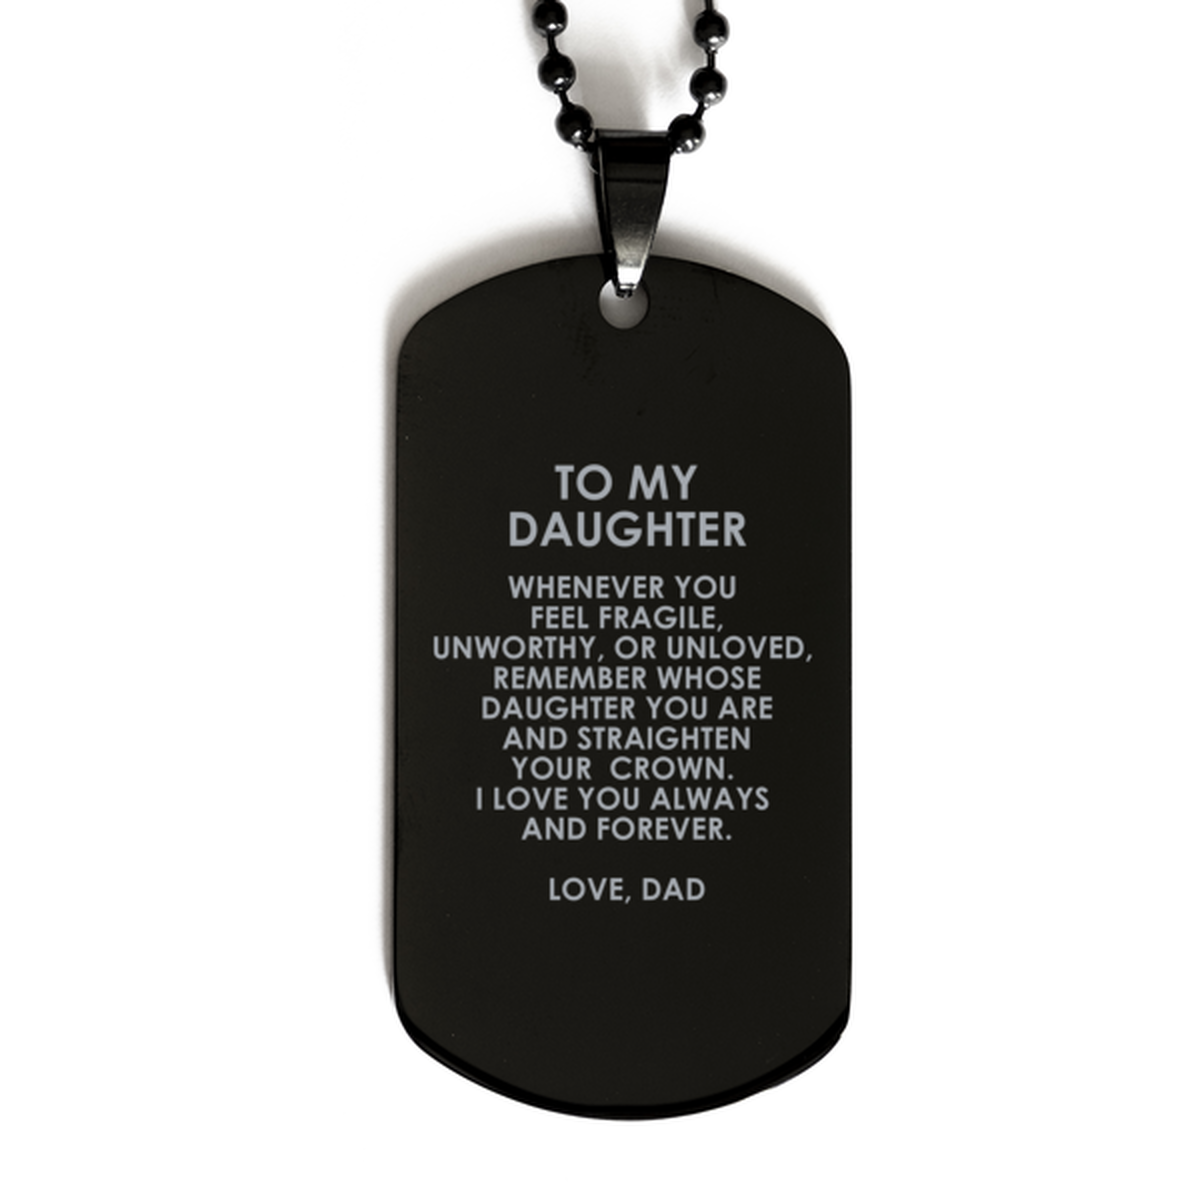 To My Daughter Black Dog Tag, I Love You Always And Forever, Birthday Gifts For Daughter From Dad, Christmas Gifts For Women